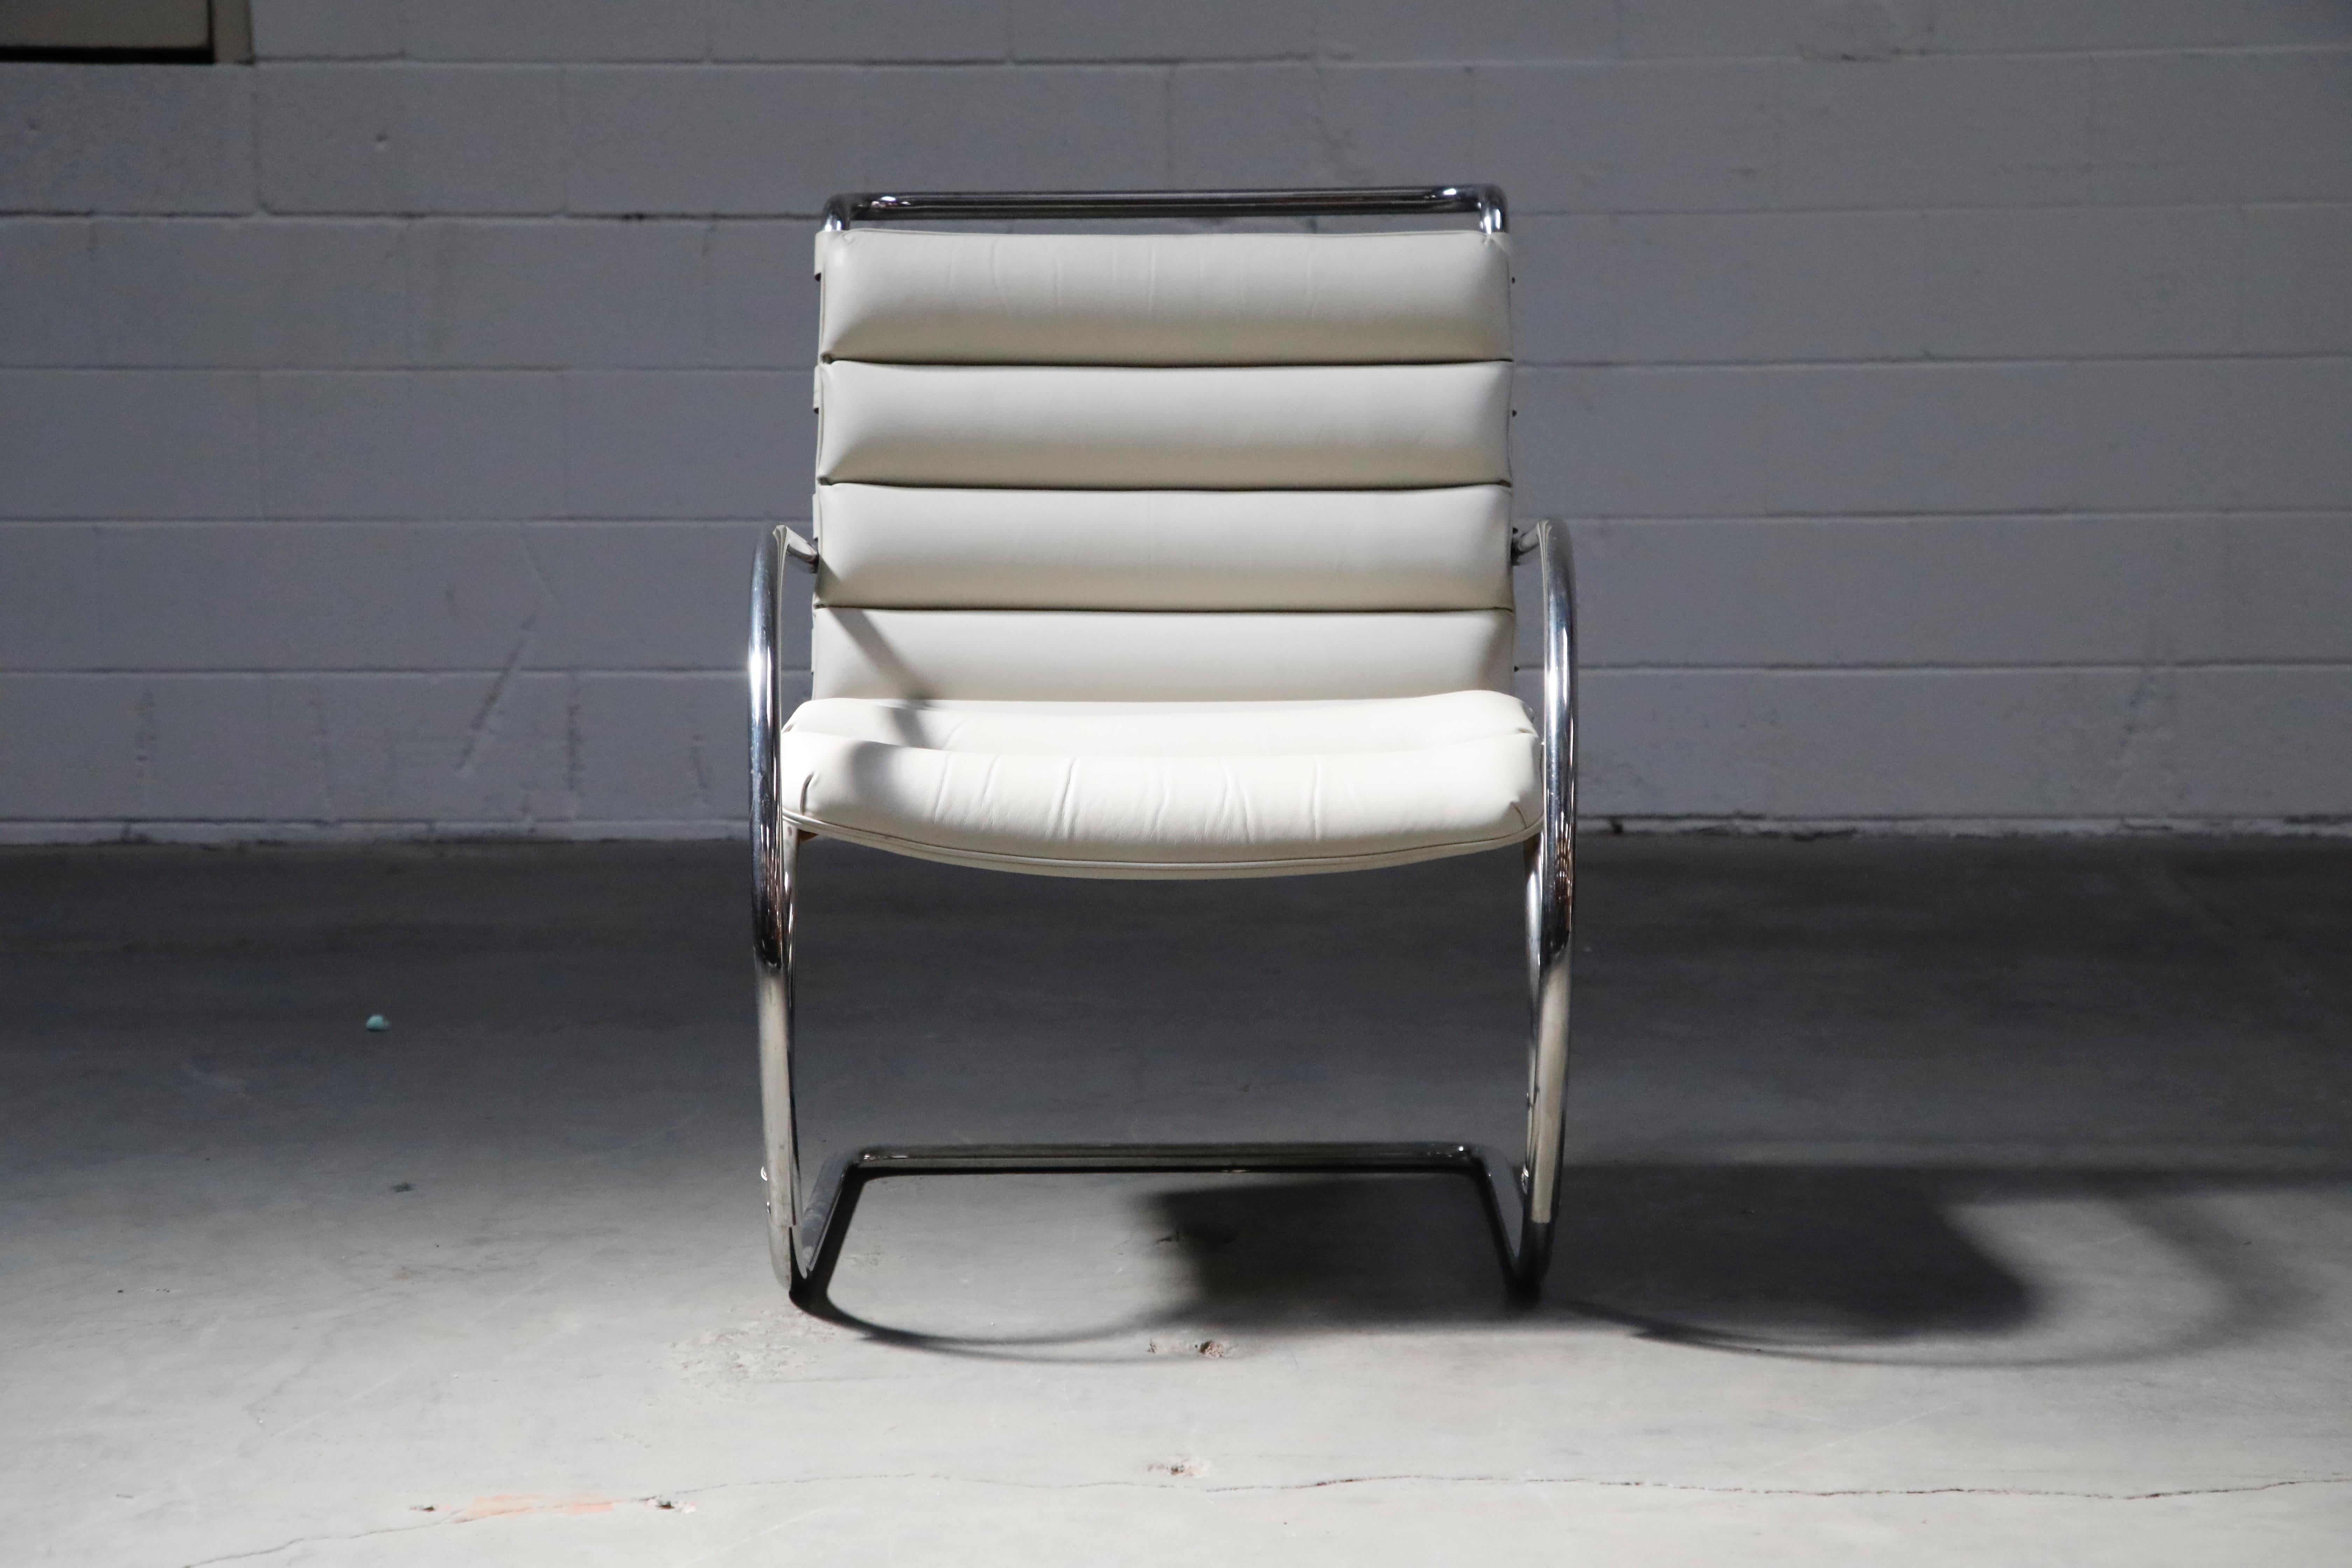 An incredible pair of signed MR armchairs by Ludwig Mies van der Rohe for Knoll Studio, both pairs are stamped Knoll Studio with Mies van der Rohe's signature to the frames. The very-light-grey leather, which looks almost-white in some light